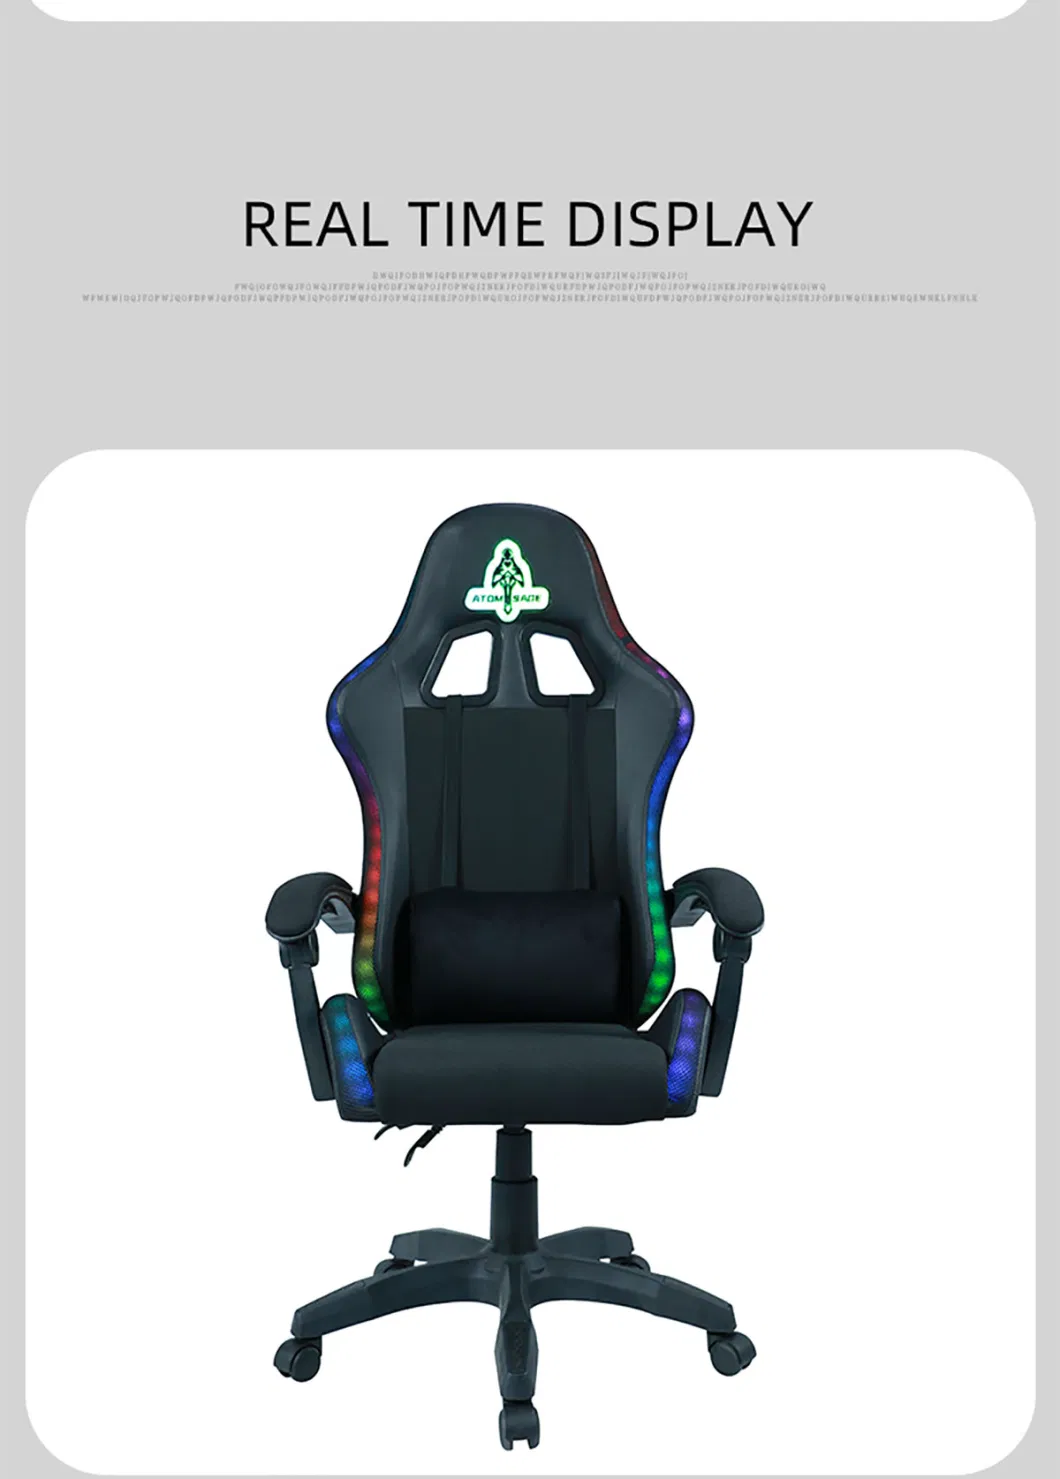 Partner RGB LED Lights Footrest Gaming Chair Functional Ergonomics Chair